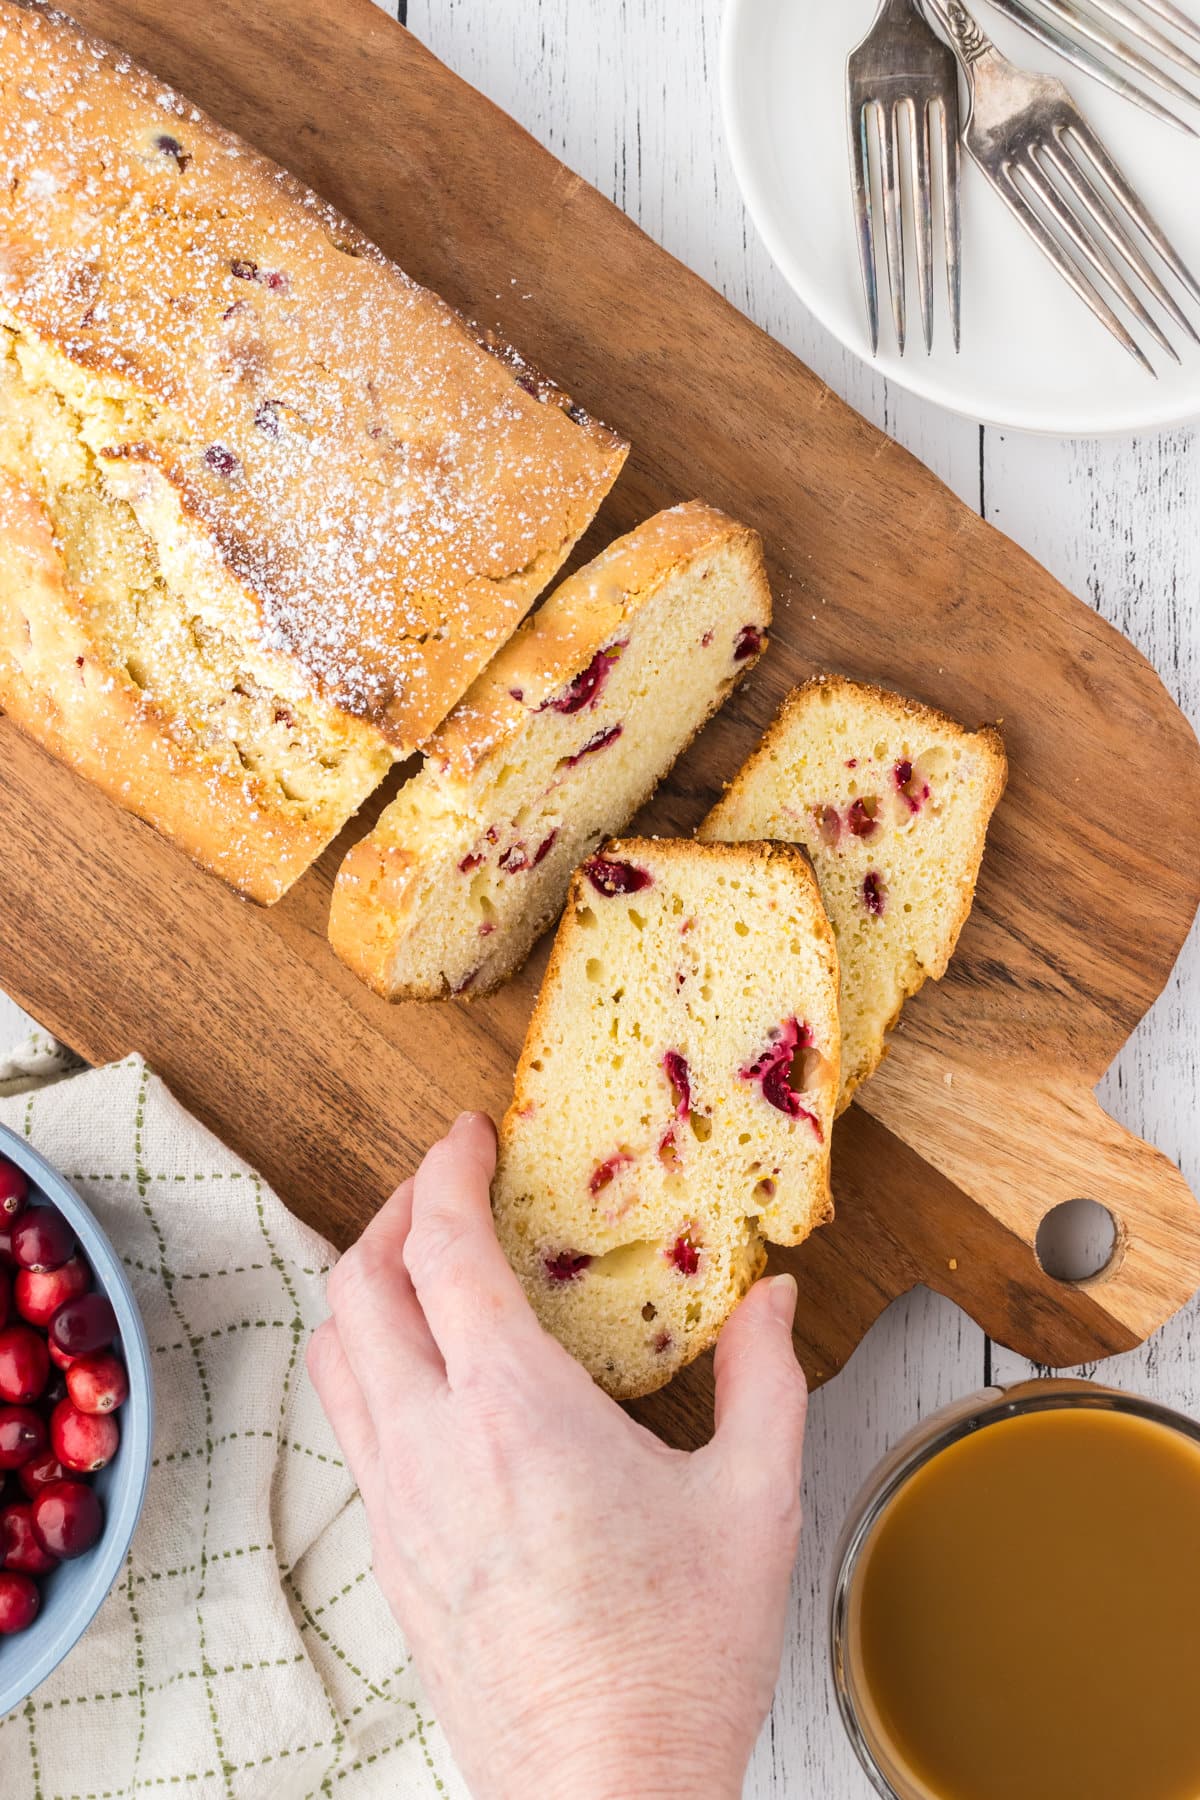 An overhead view of cranberry pound cake, sliced into a few pieces. A hand is holding one slice to show the cranberries inside the loaf.